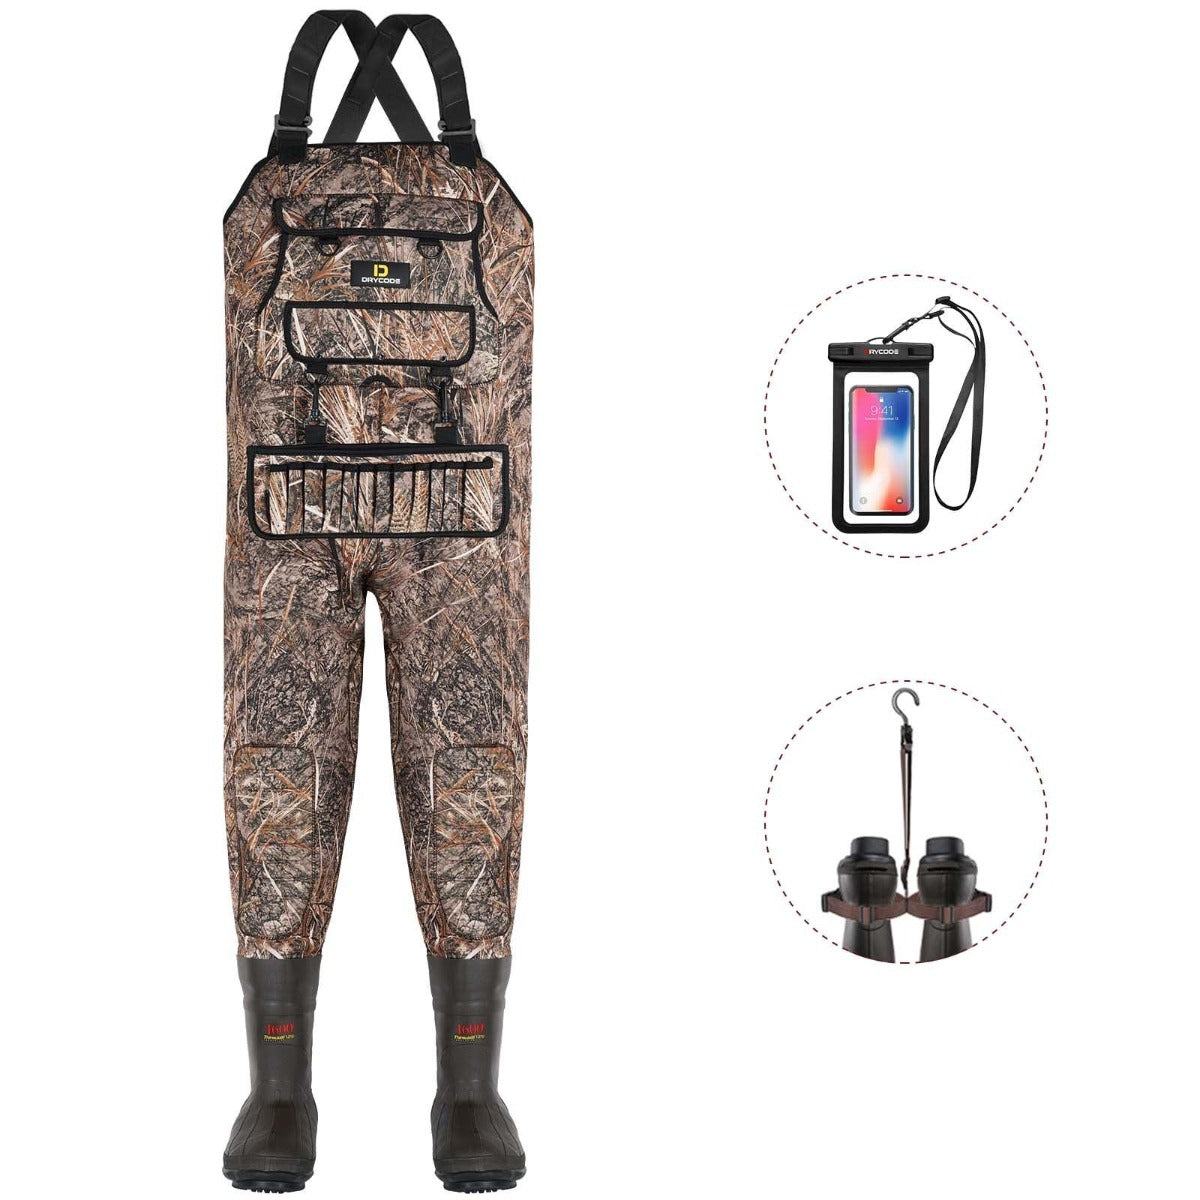  DRYCODE Chest Waders for Men with 1600g Boots